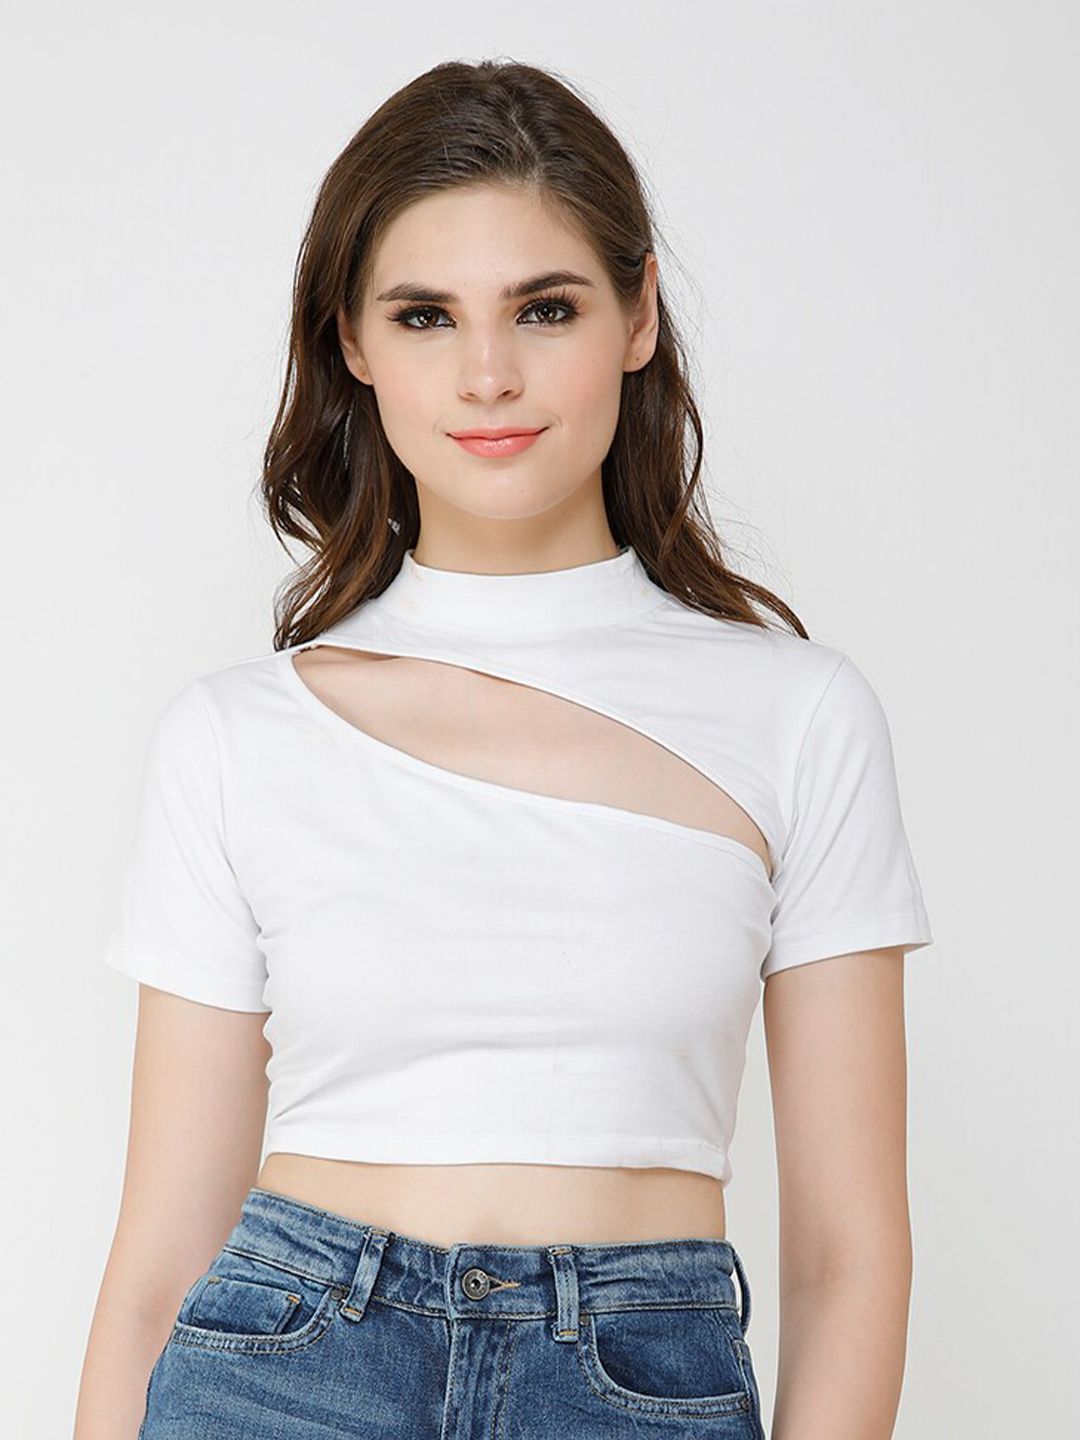 SCORPIUS White Solid Cut out High Neck Crop Top Price in India